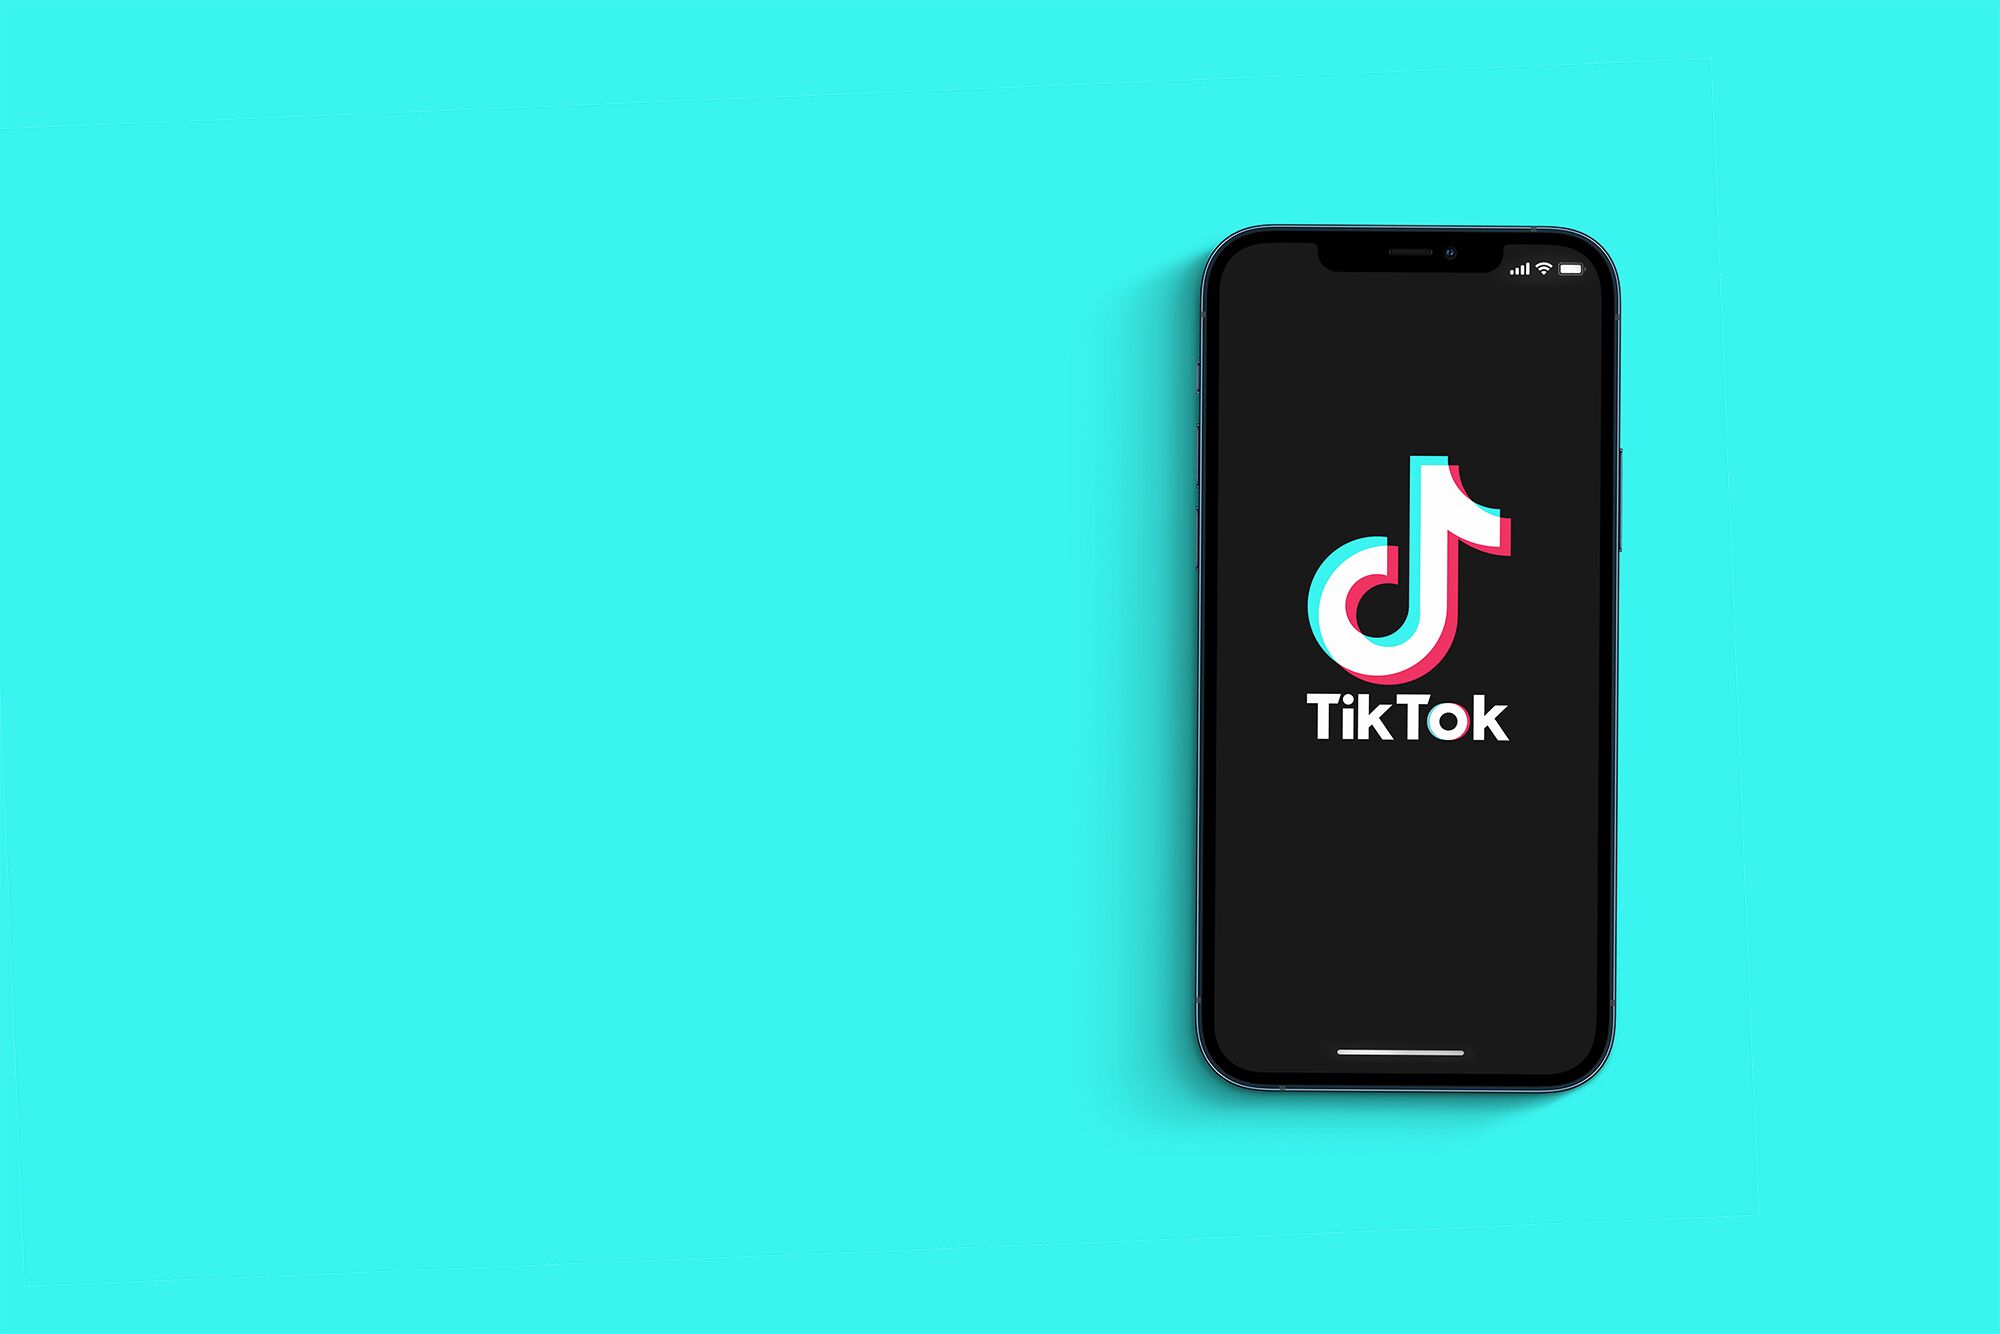 TikTok Shakes Things Up: The New Search Widget Putting Google To The Test